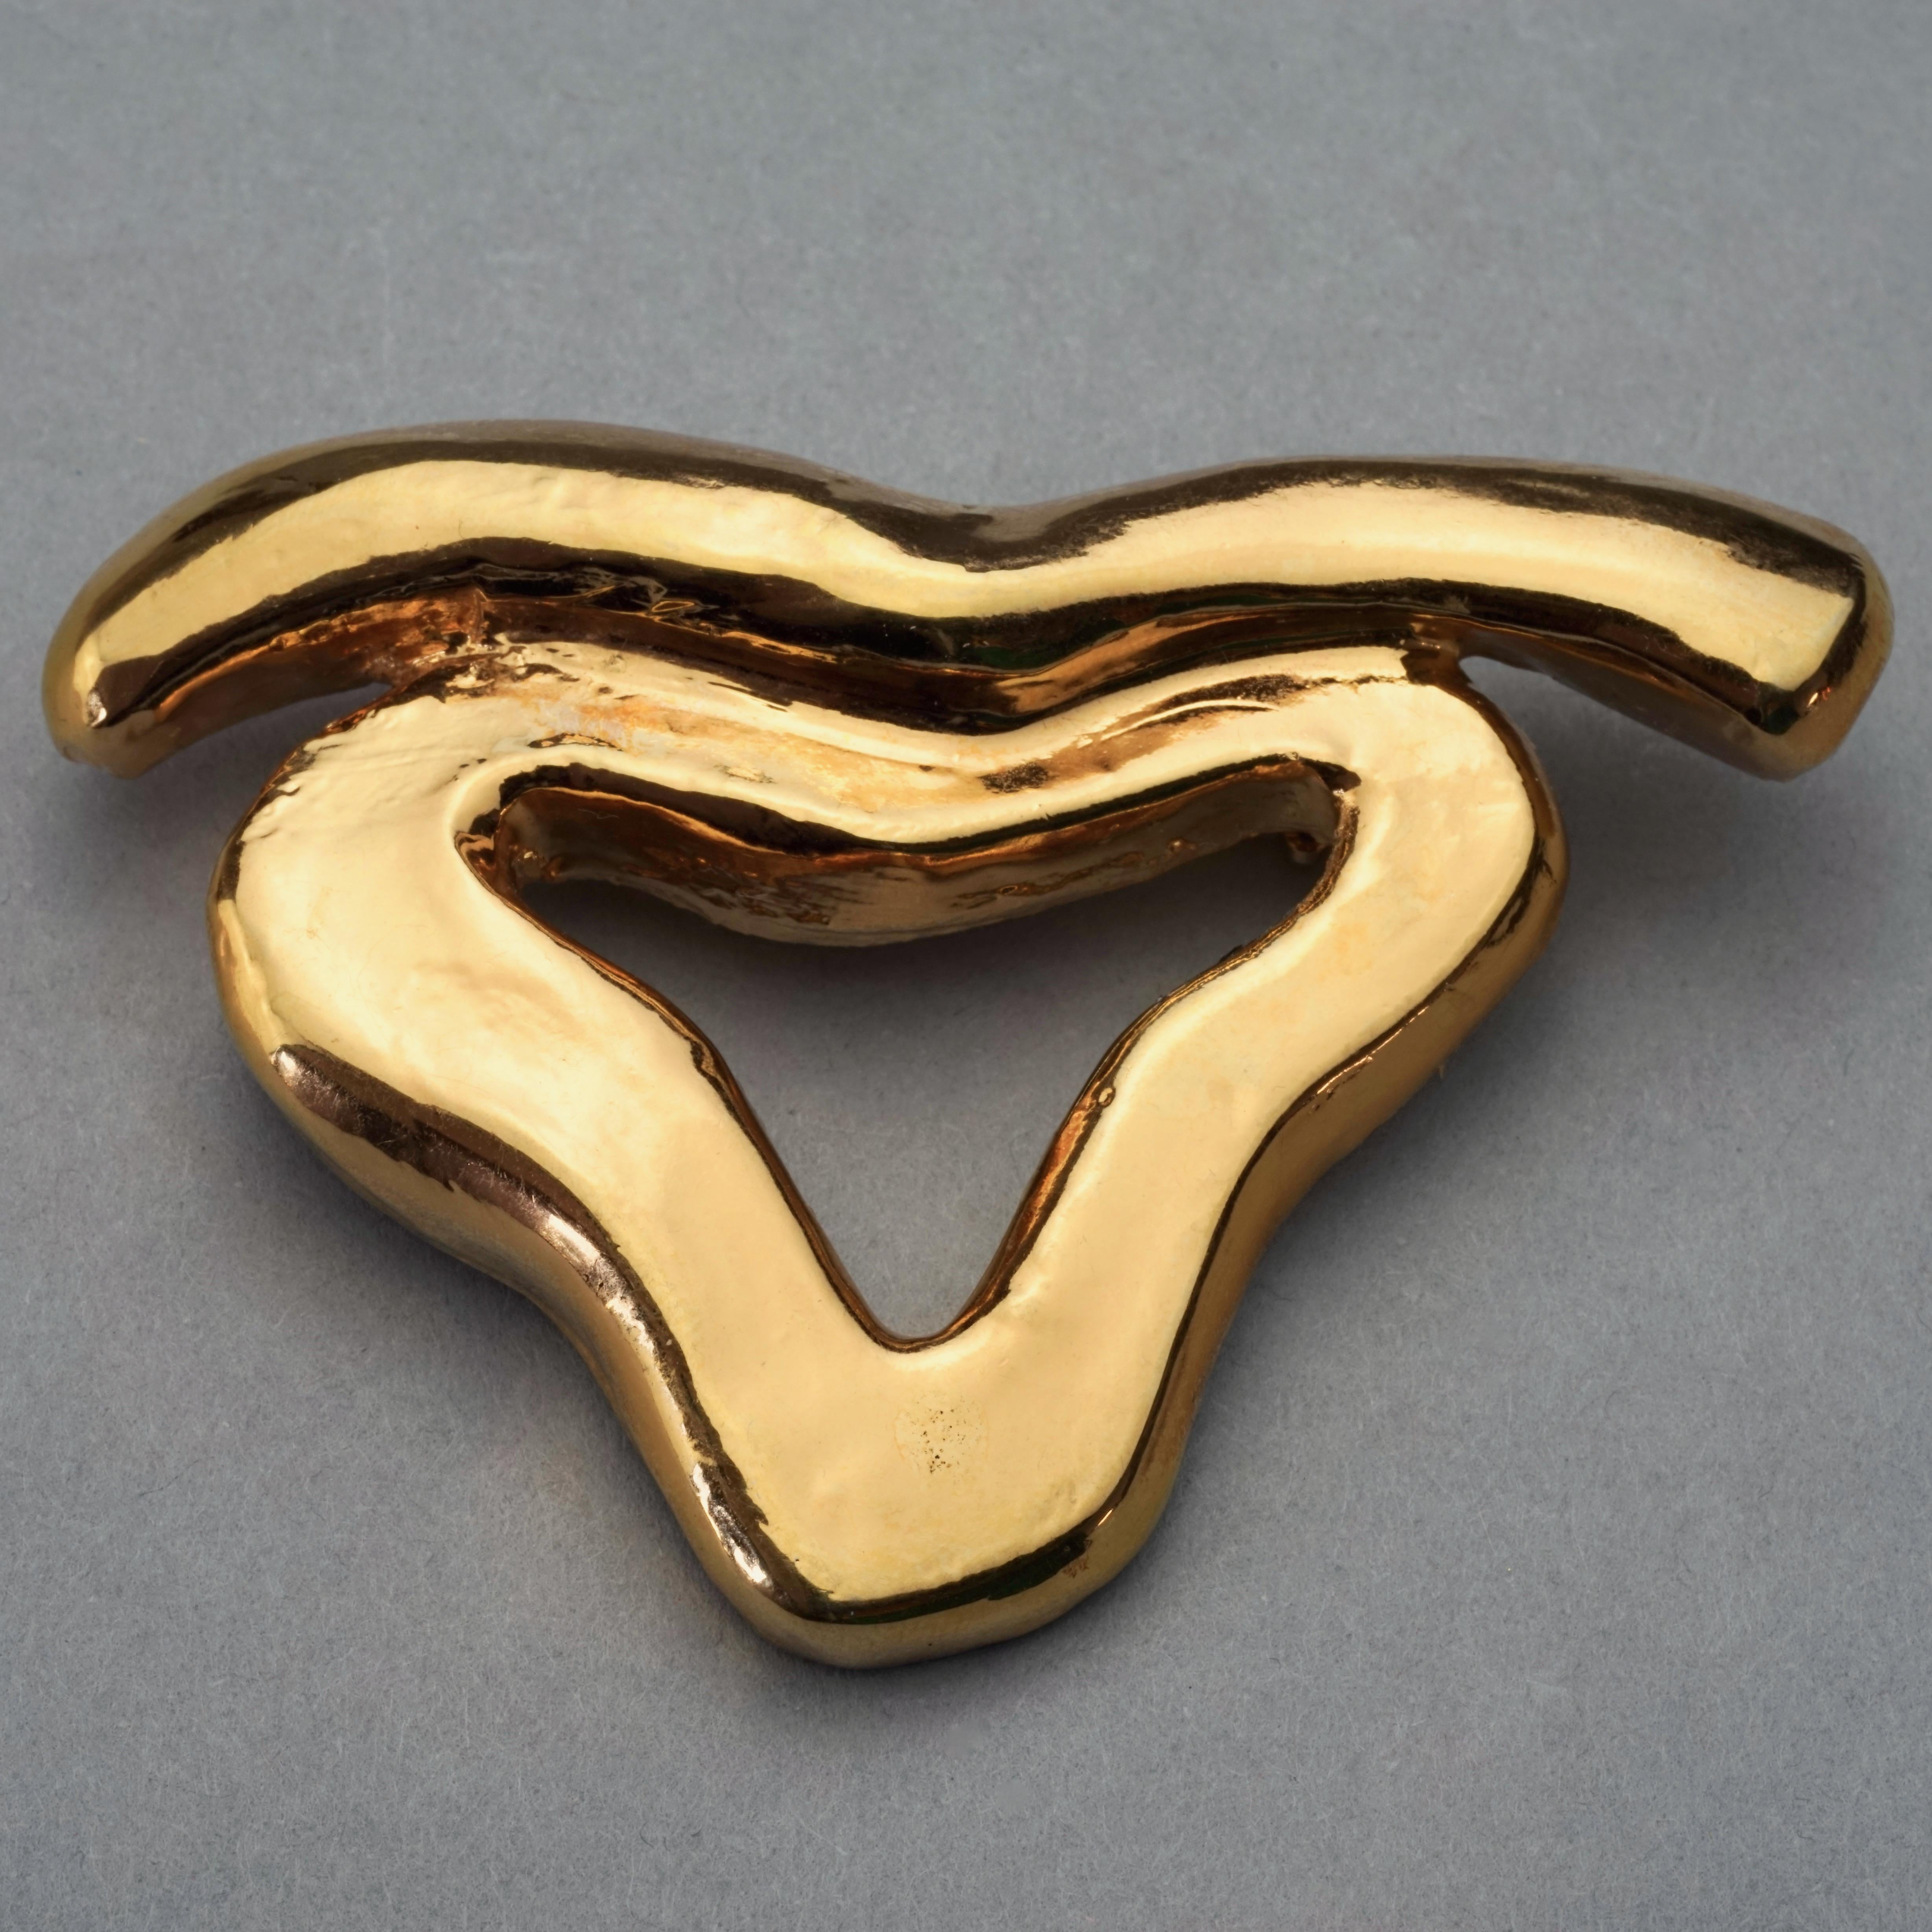 Vintage CHRISTIAN LACROIX Bull Modernist Abstract Brooch In Good Condition For Sale In Kingersheim, Alsace